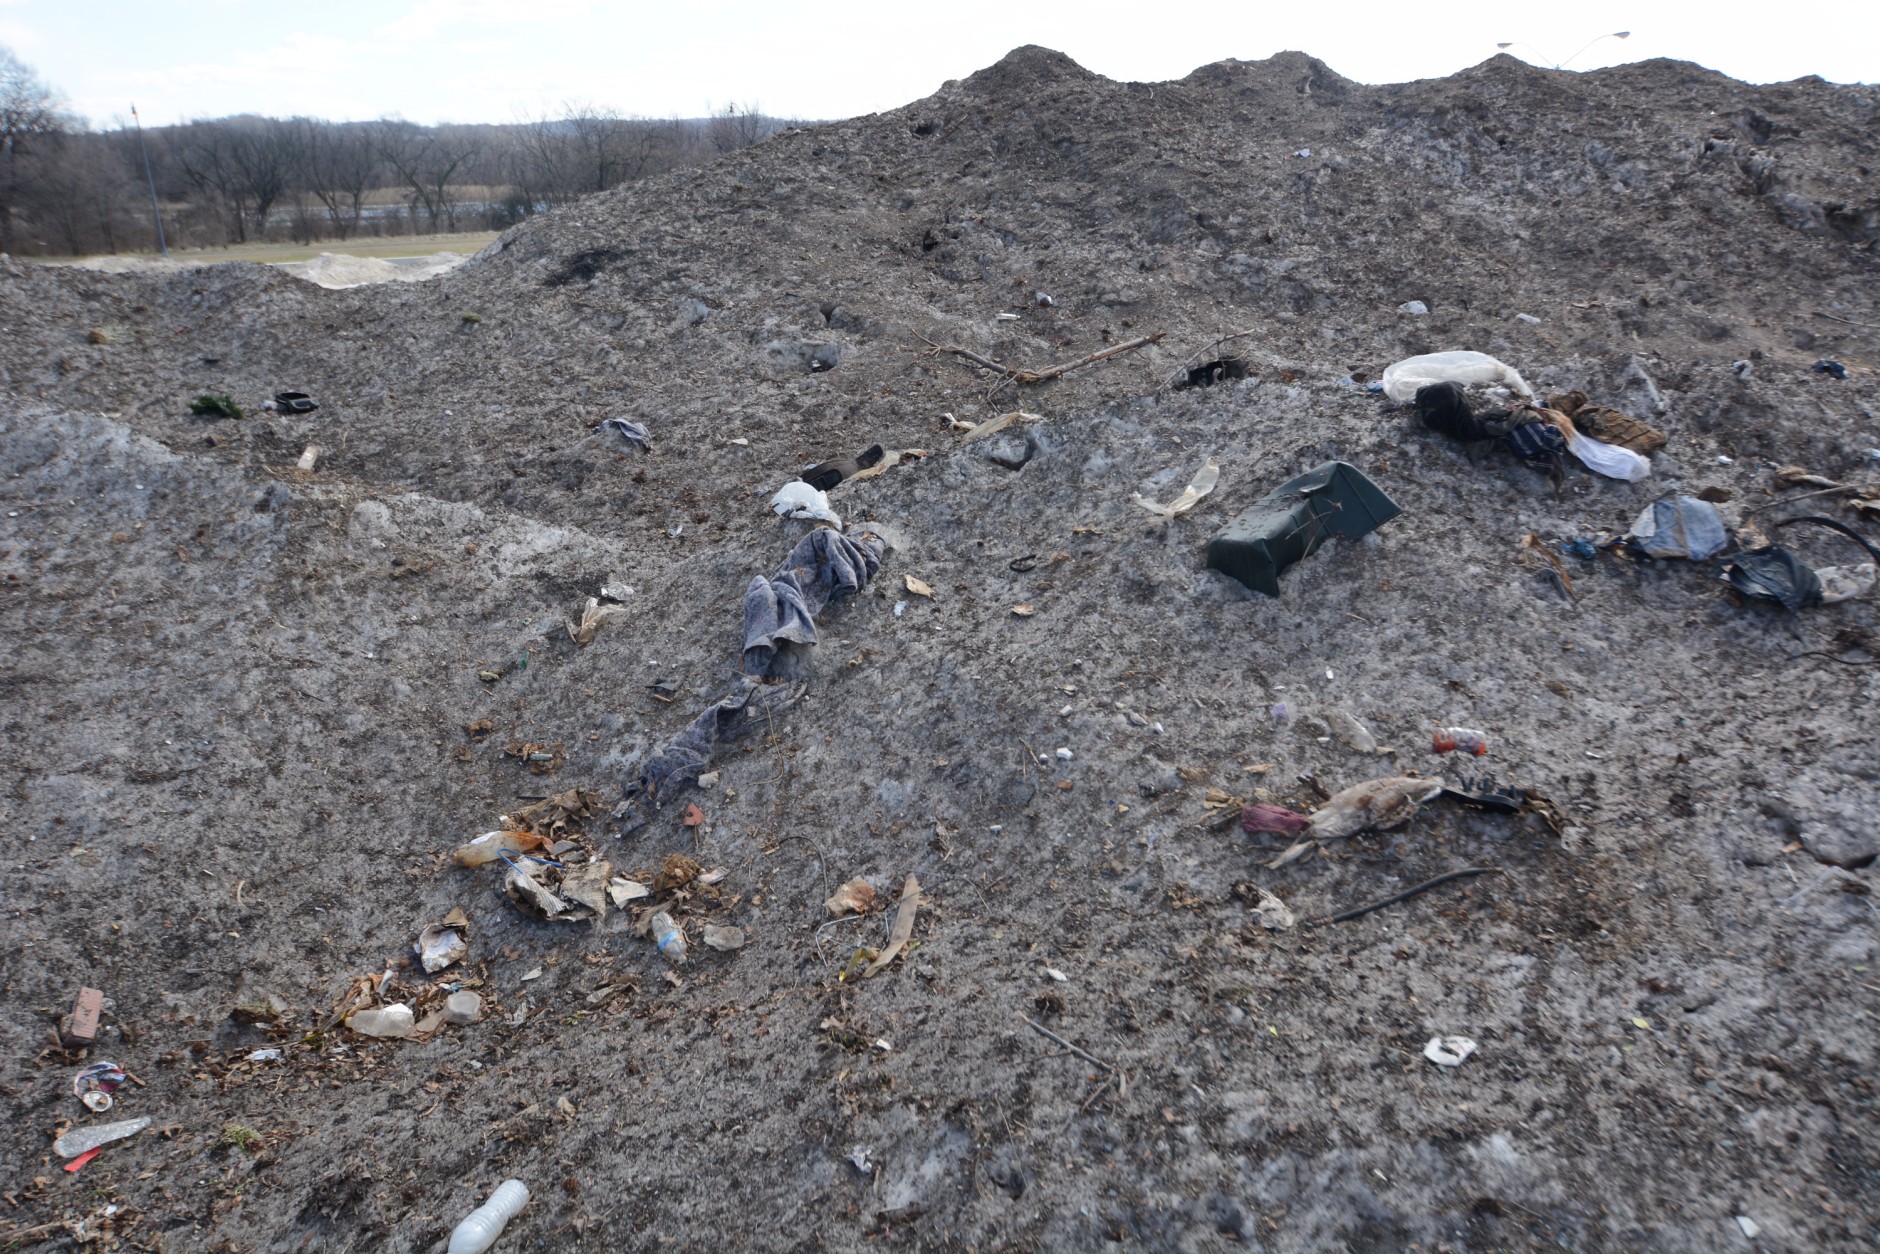 The tallest piles of snow and trash are about 20 feet high after some melting last week. This week's cold temperatures will likely freeze these icy landfills in place.  (WTOP/Dave Dildine)